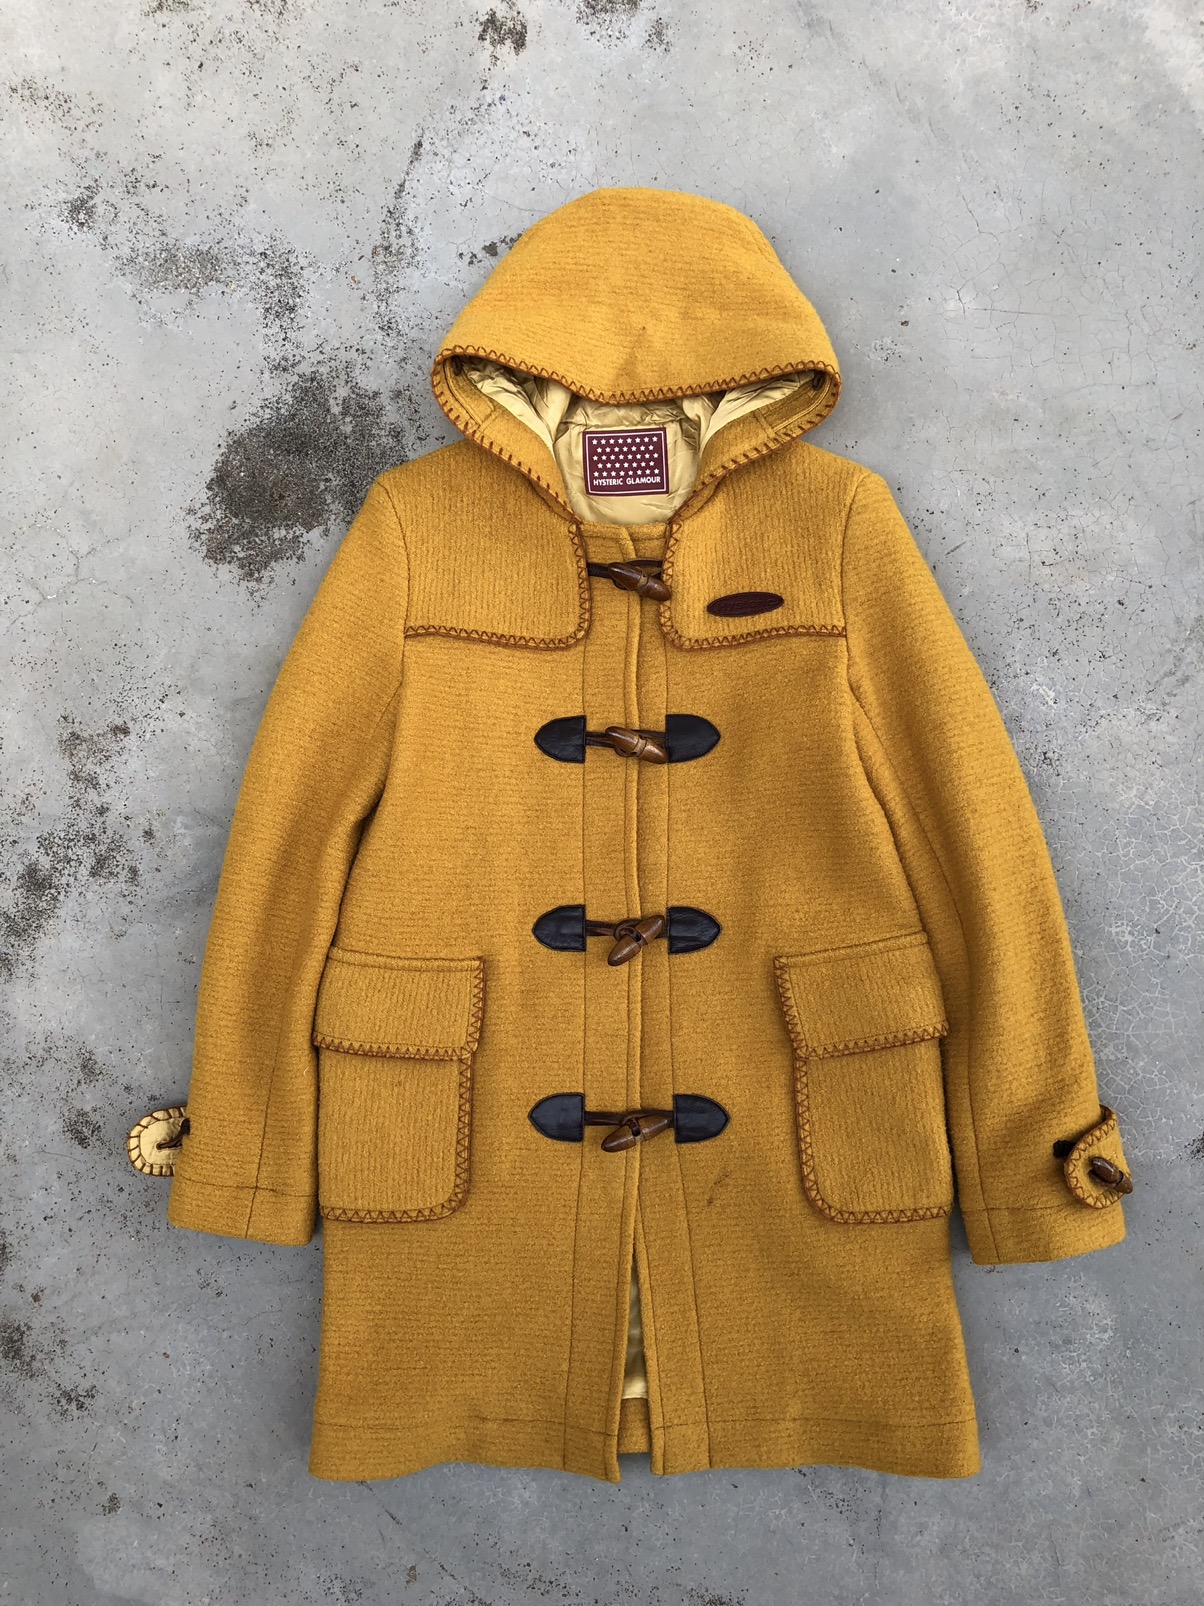 🔥HYSTERIC GLAMOUR DUFFEL COAT MADE IN JAPAN - 9